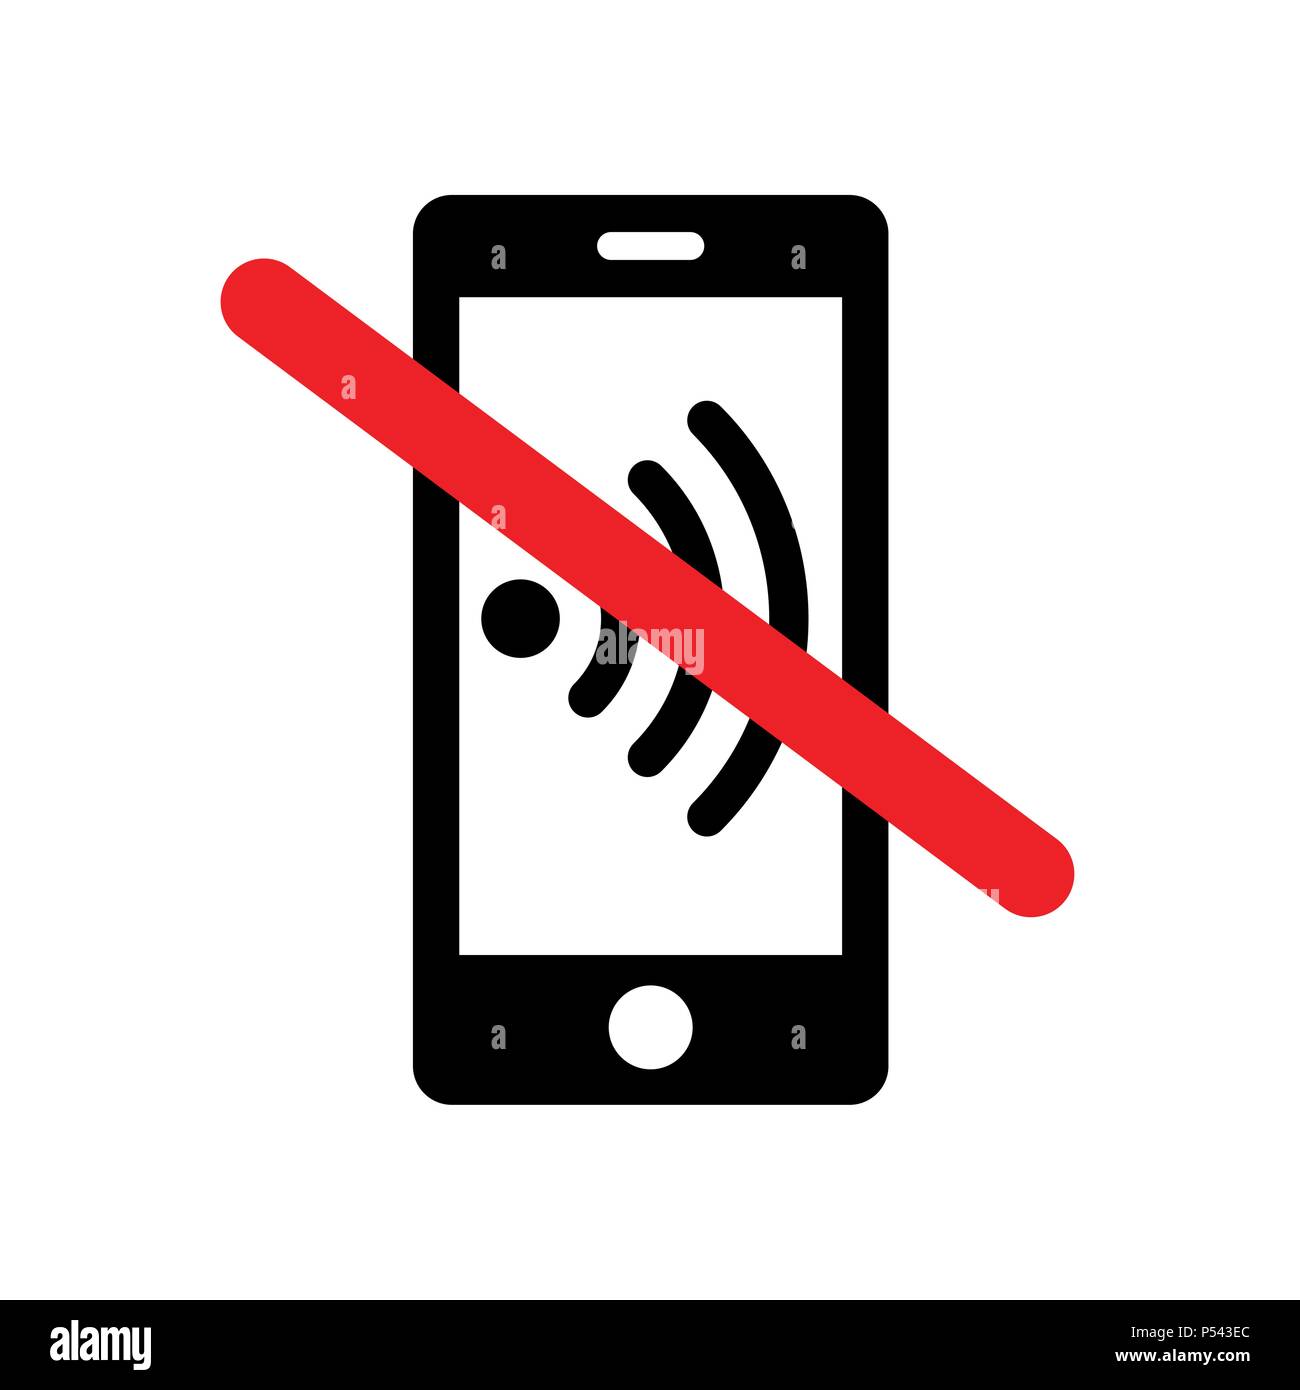 Please silence your mobile phone - warning sign Stock Vector